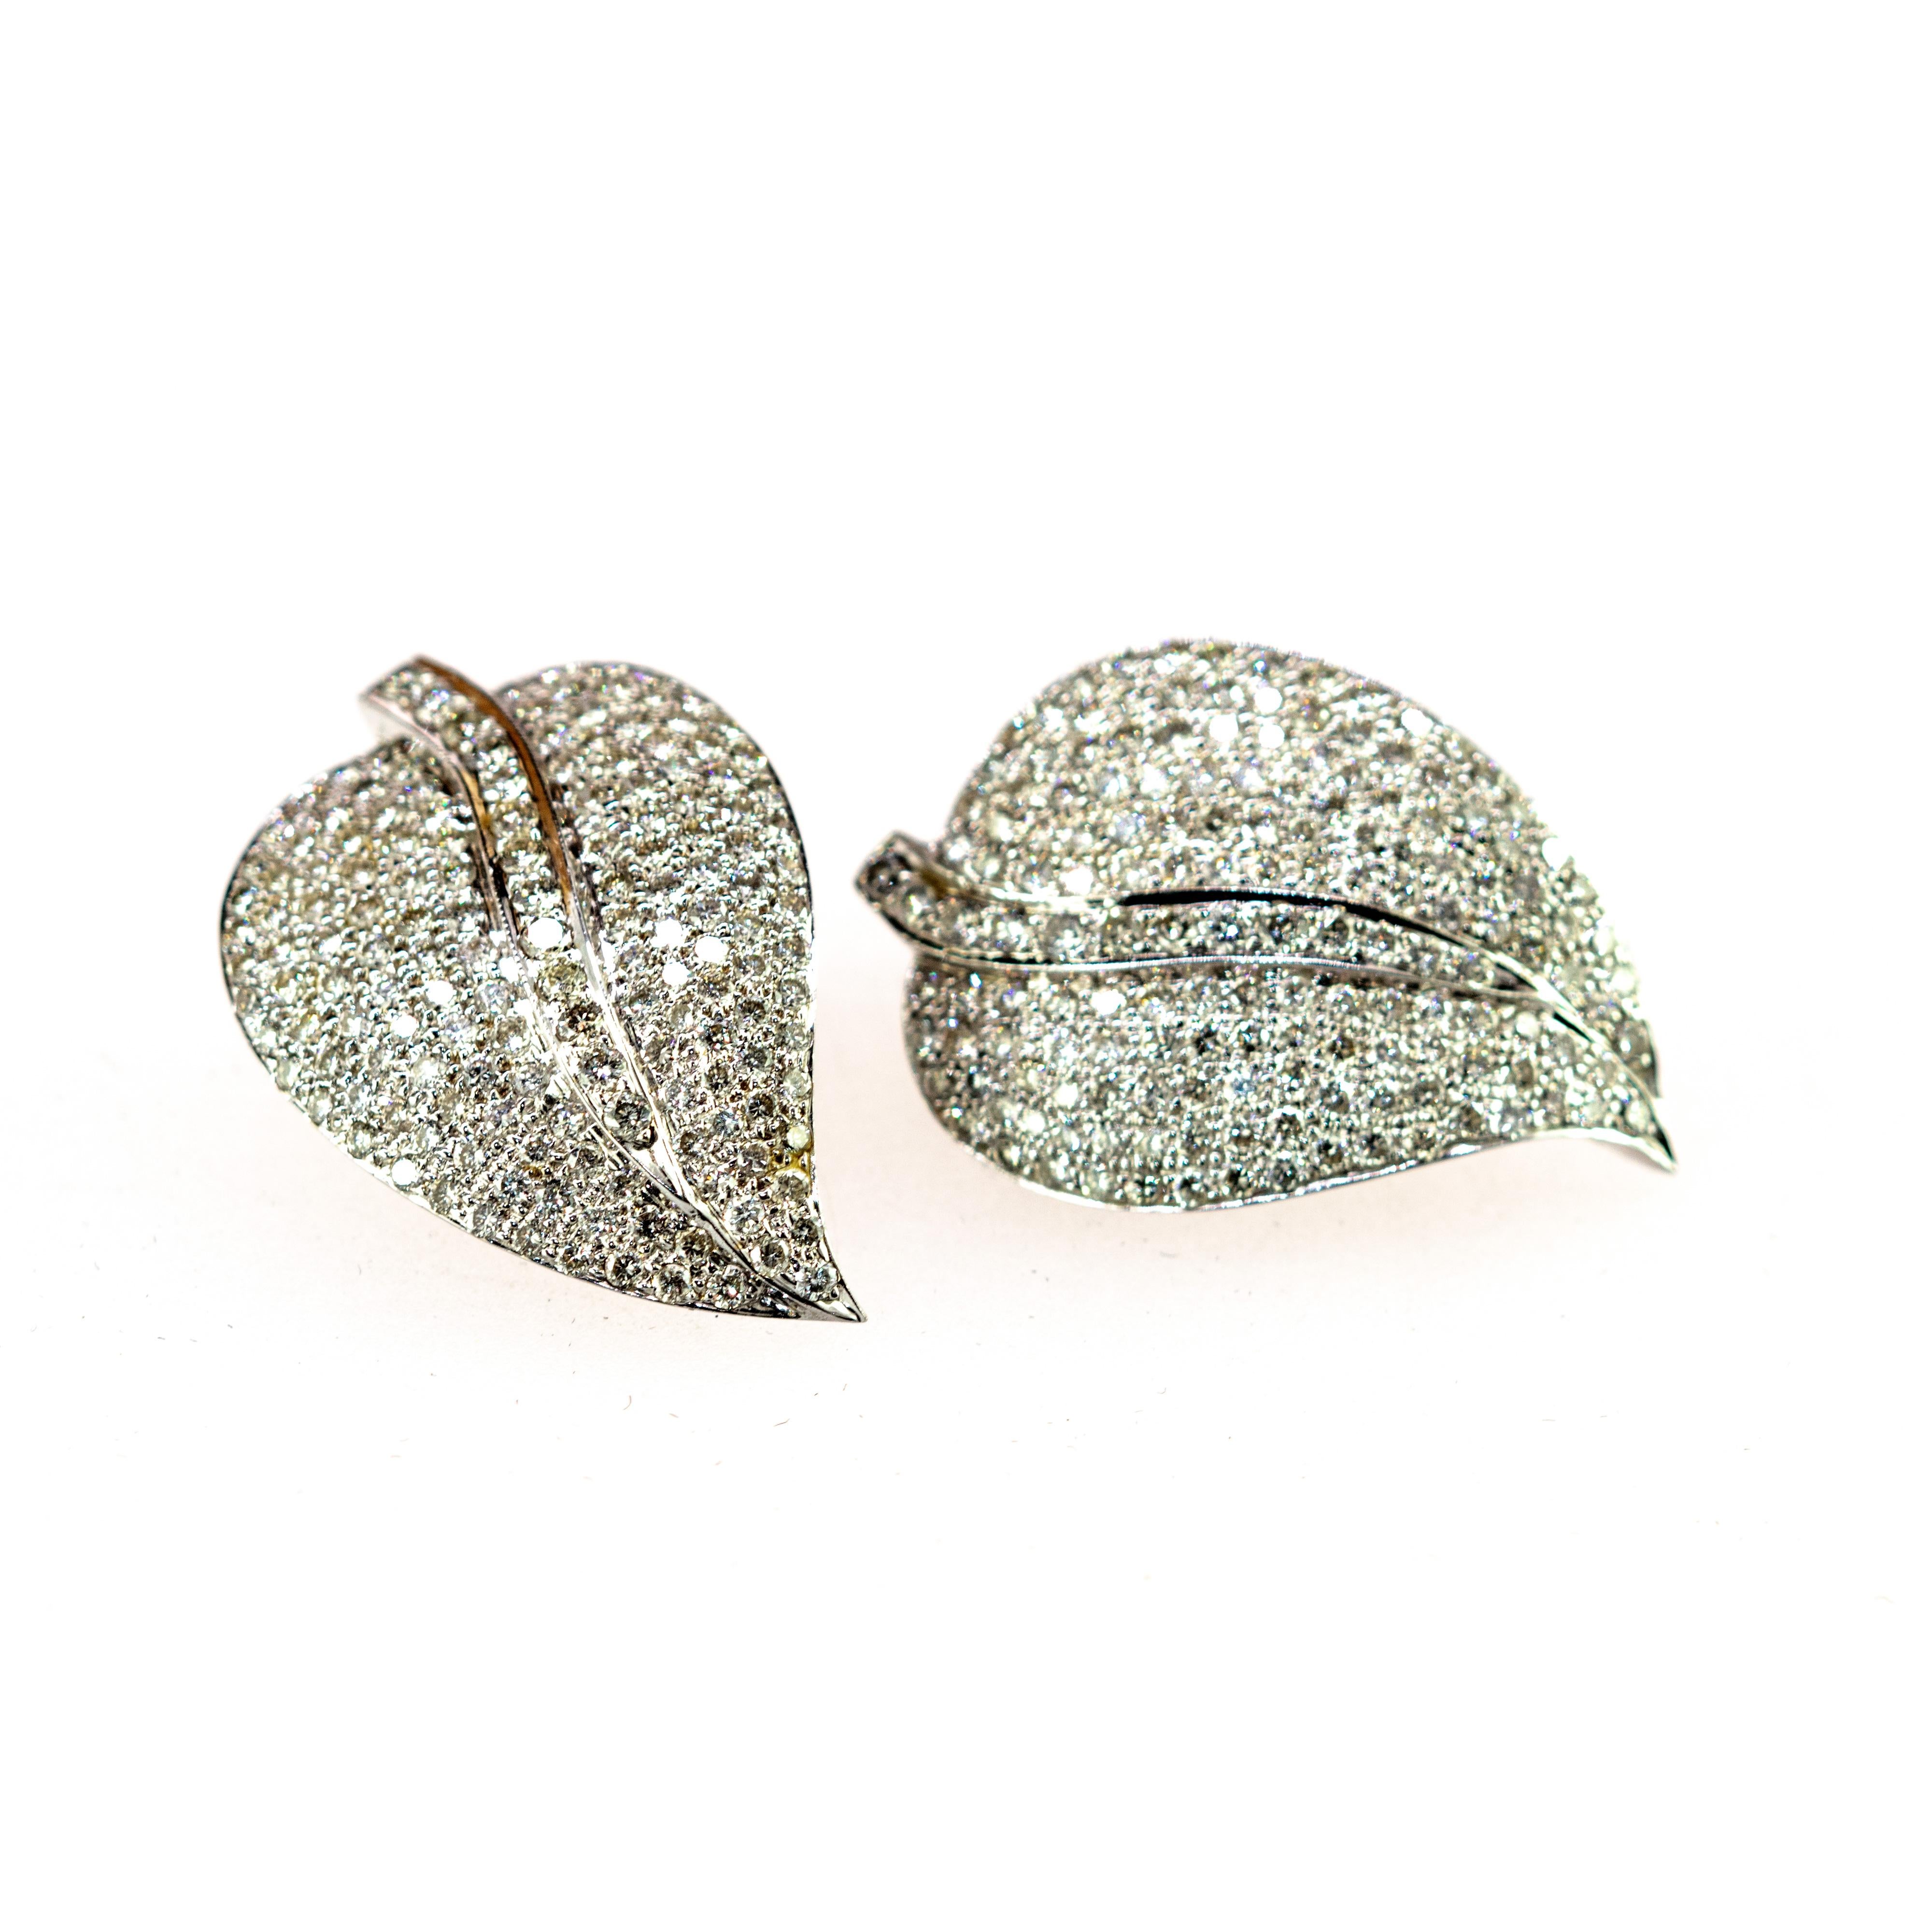 Rare and magnificent diamonds earrings mixed with 18 karat white gold embellished in a leaf shape perfect for a stunning night! 
 
Immerse yourself in a Valentino style with these beautiful leaves earrings as delicate as snow in an Irish winter.